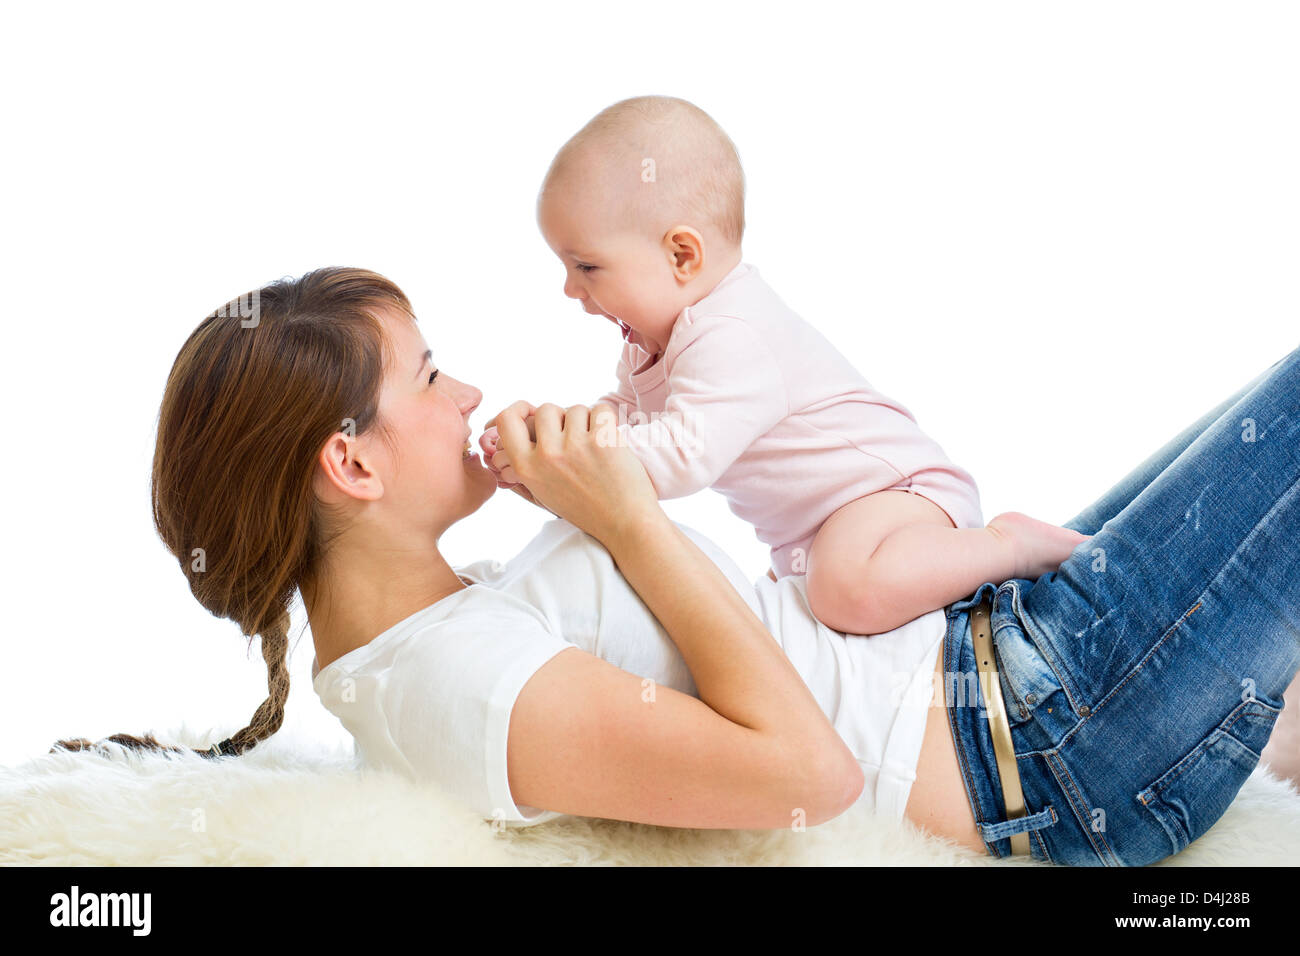 Loving mother having fun with her baby girl Stock Photo